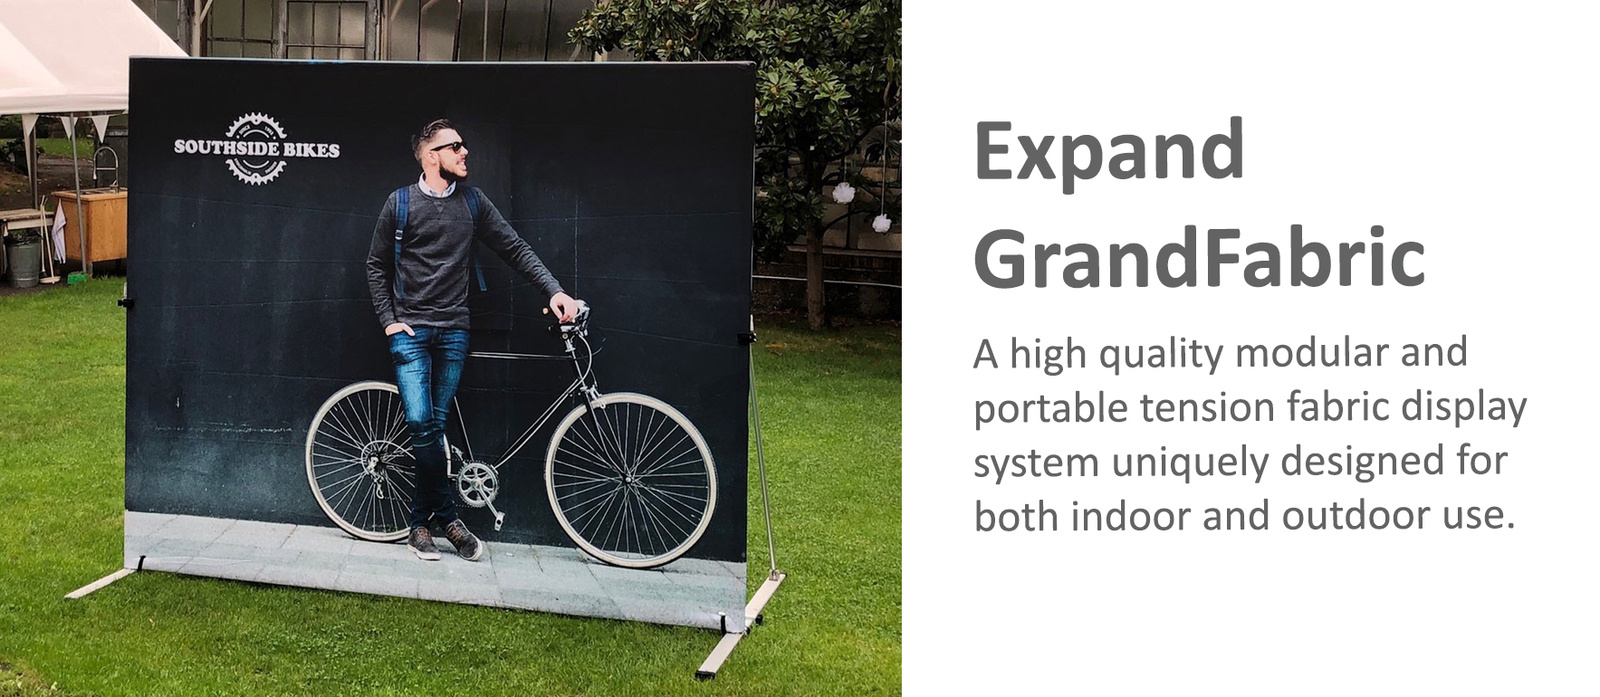 Introducing Our New Exand GrandFabric